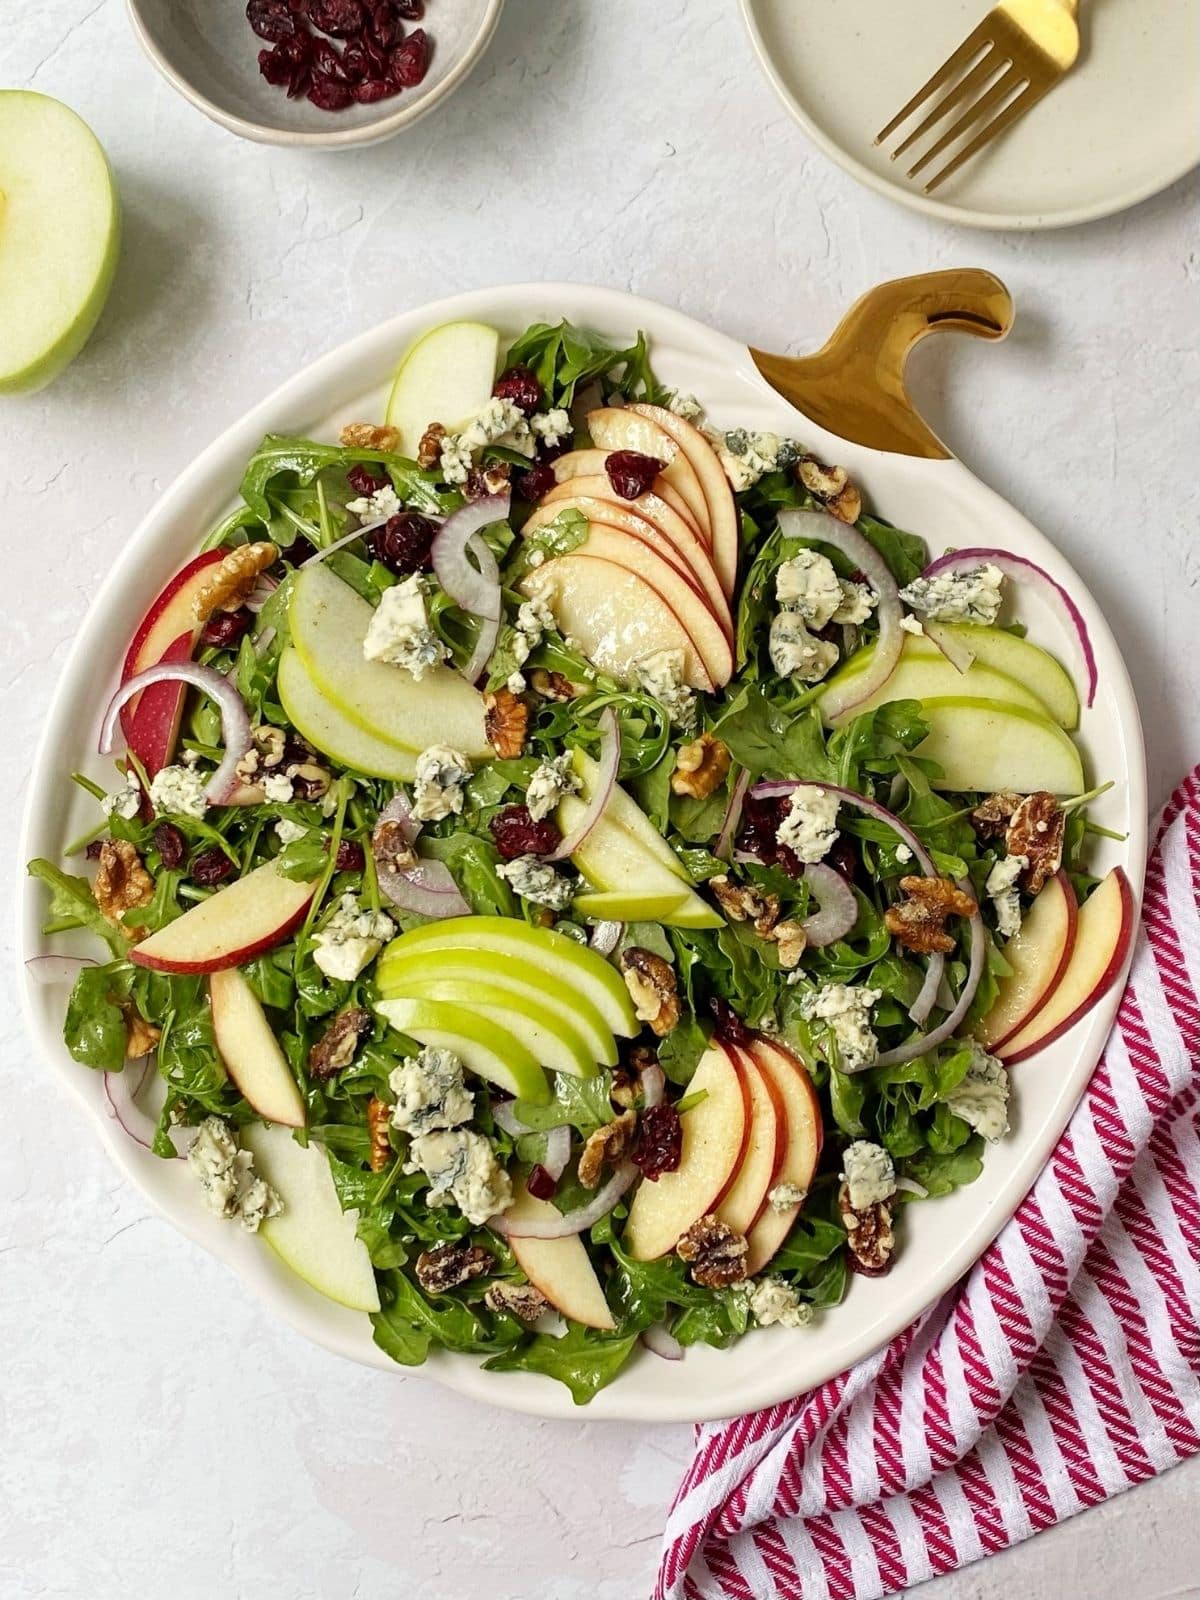 Arugula Blue Cheese Salad with Apples, Walnuts, and Cranberries